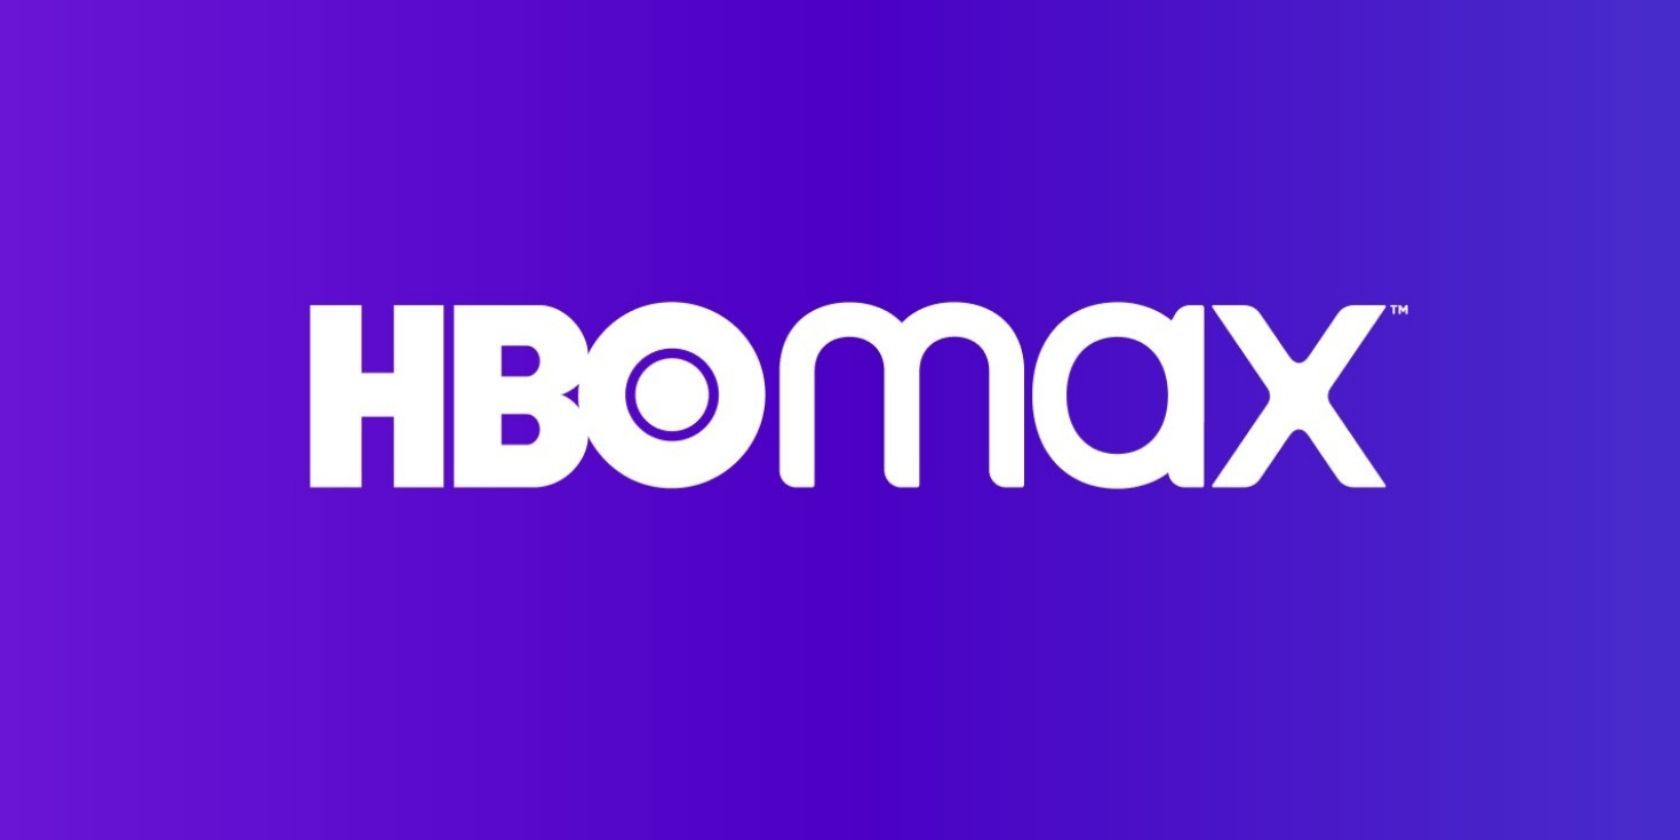 Does HBO Max not work? 7 HBO Max Issues and Solutions